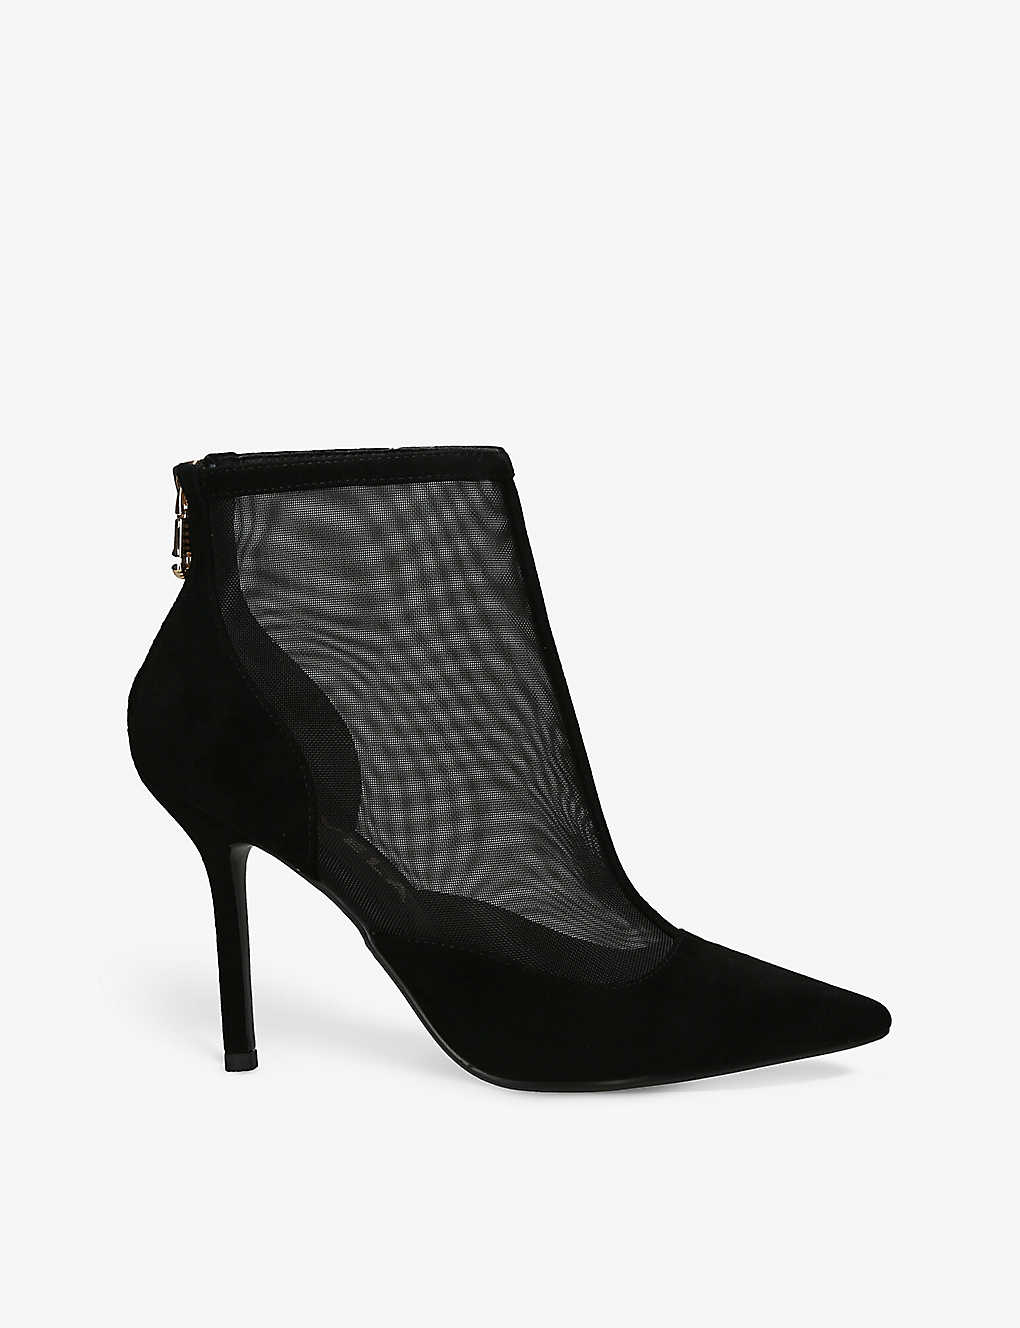 Carvela Womens Black Allure Heeled Mesh And Suede Ankle Boots